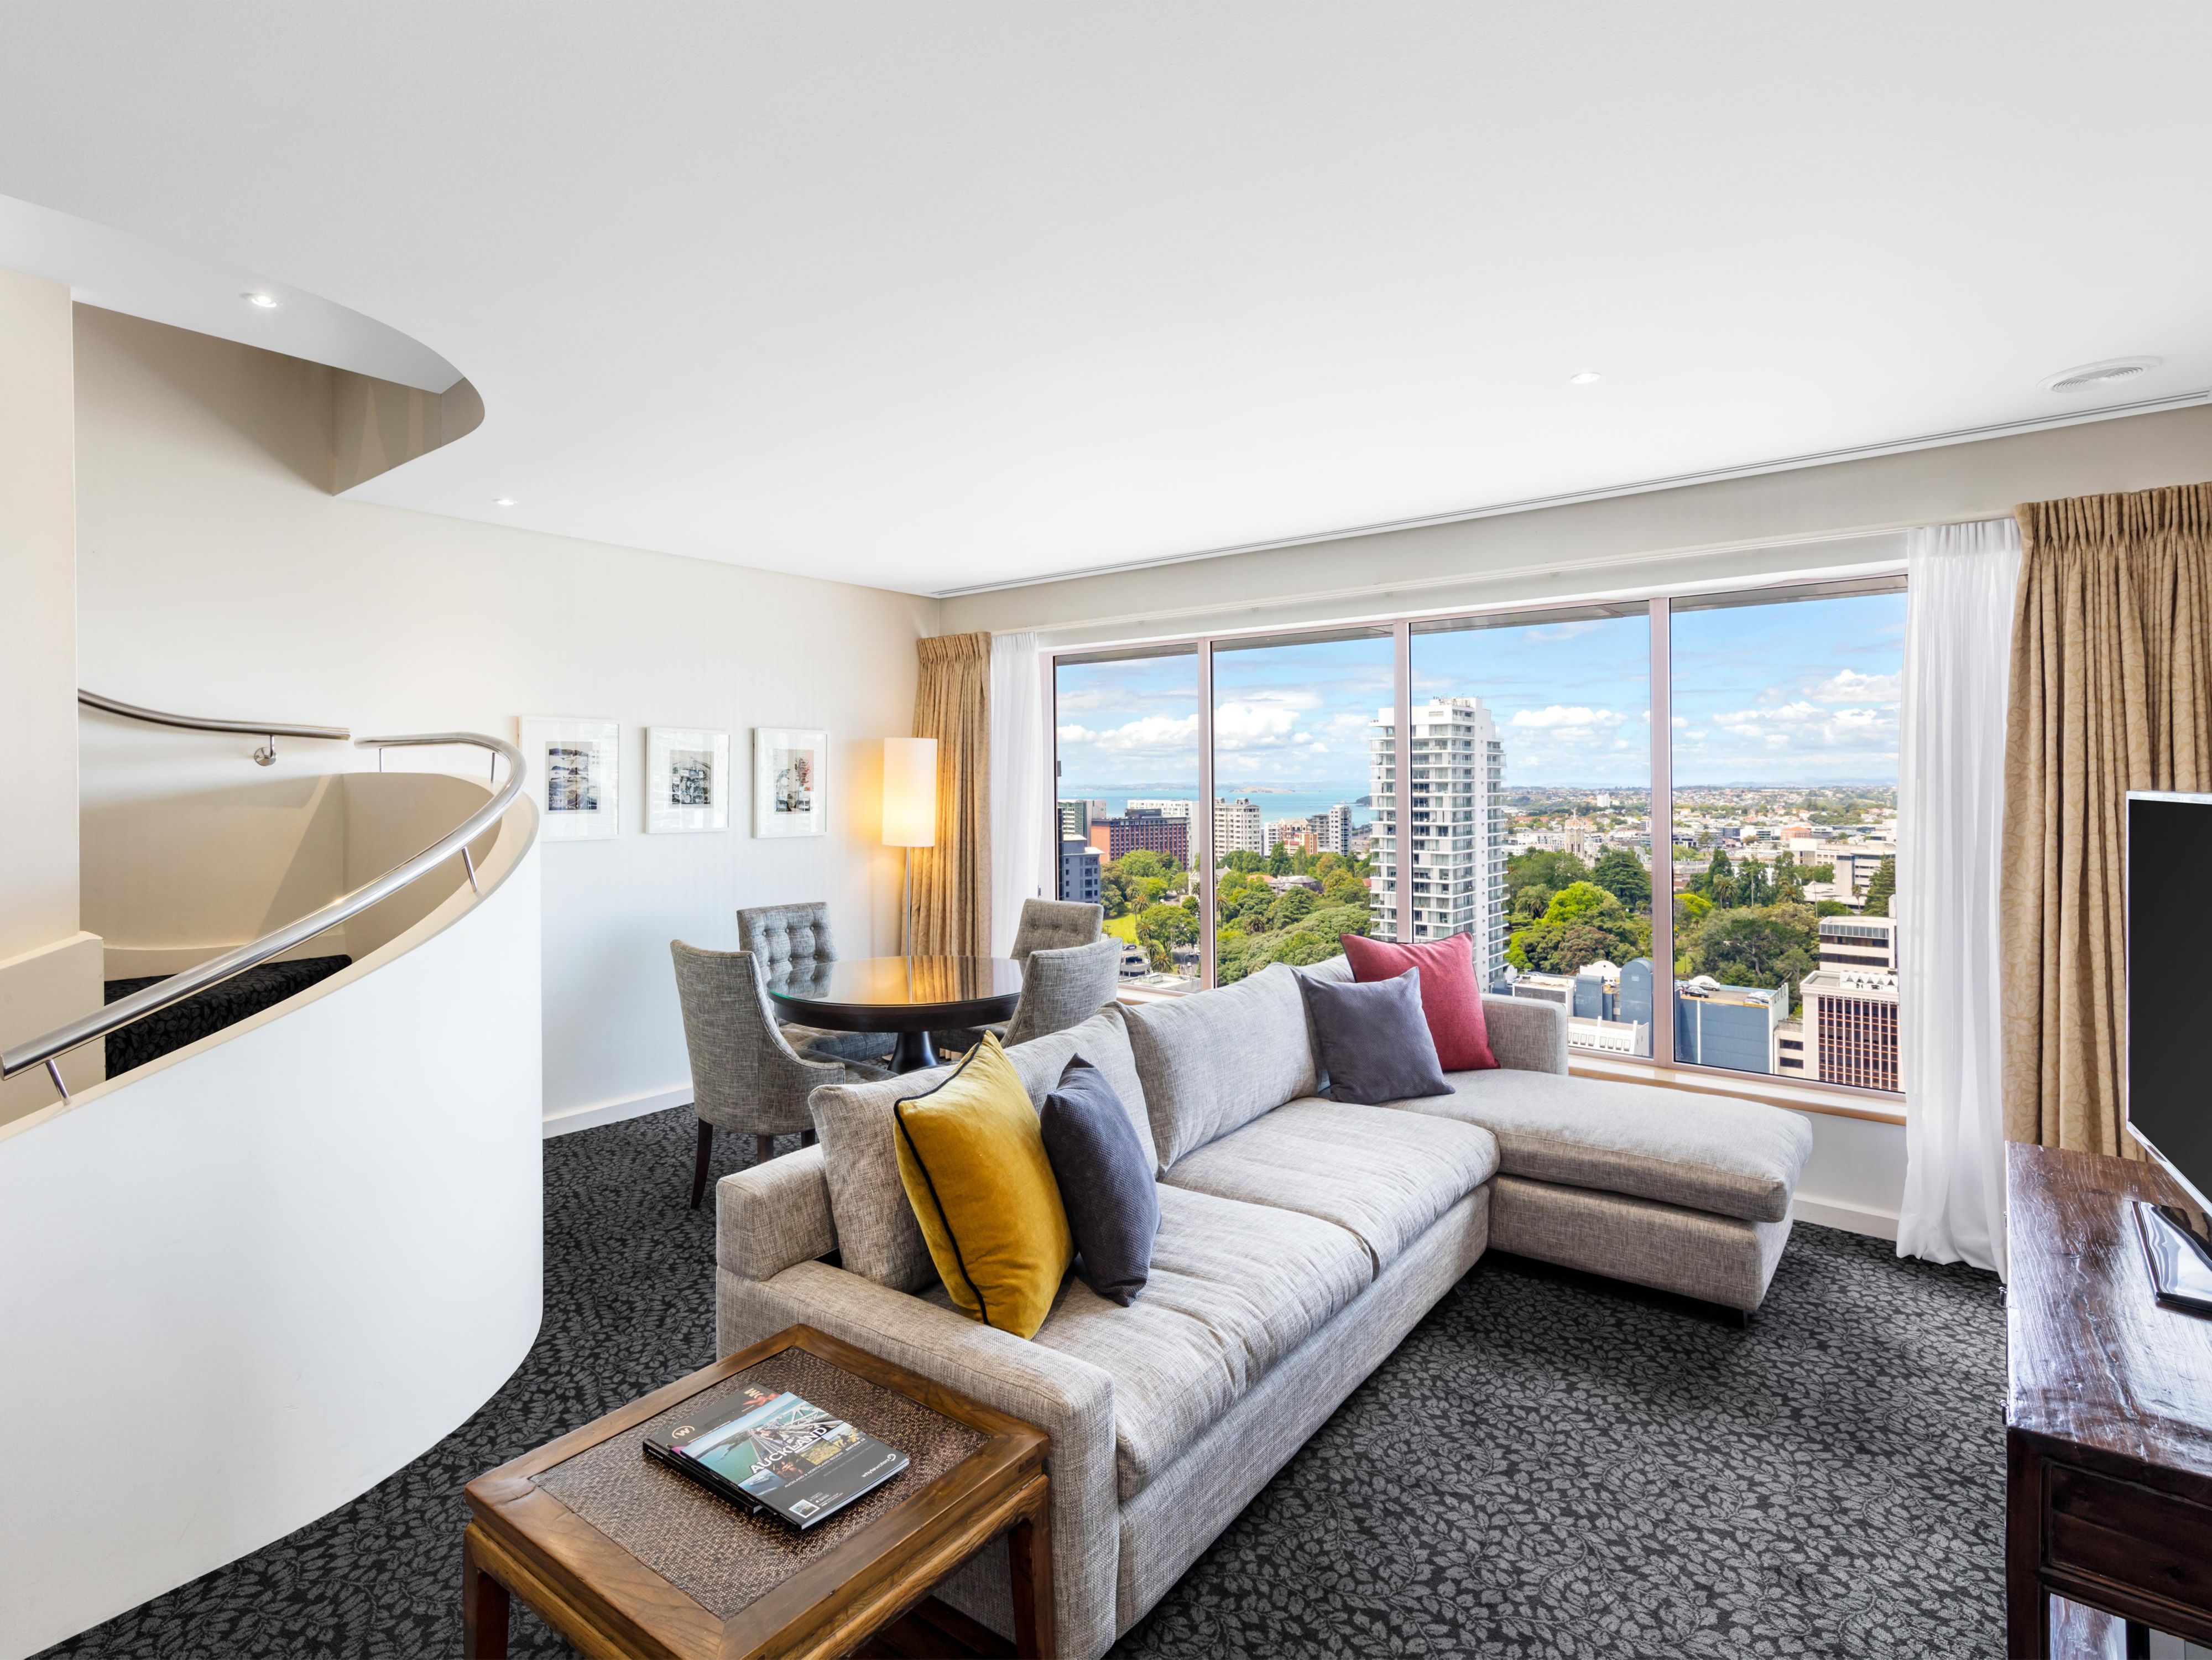 Relax and rejuvenate in Auckland's multi level apartment. Spread out in the two levels, enjoy the varied city and harbour views from the balcony. Relax in the spacious spa baths. 